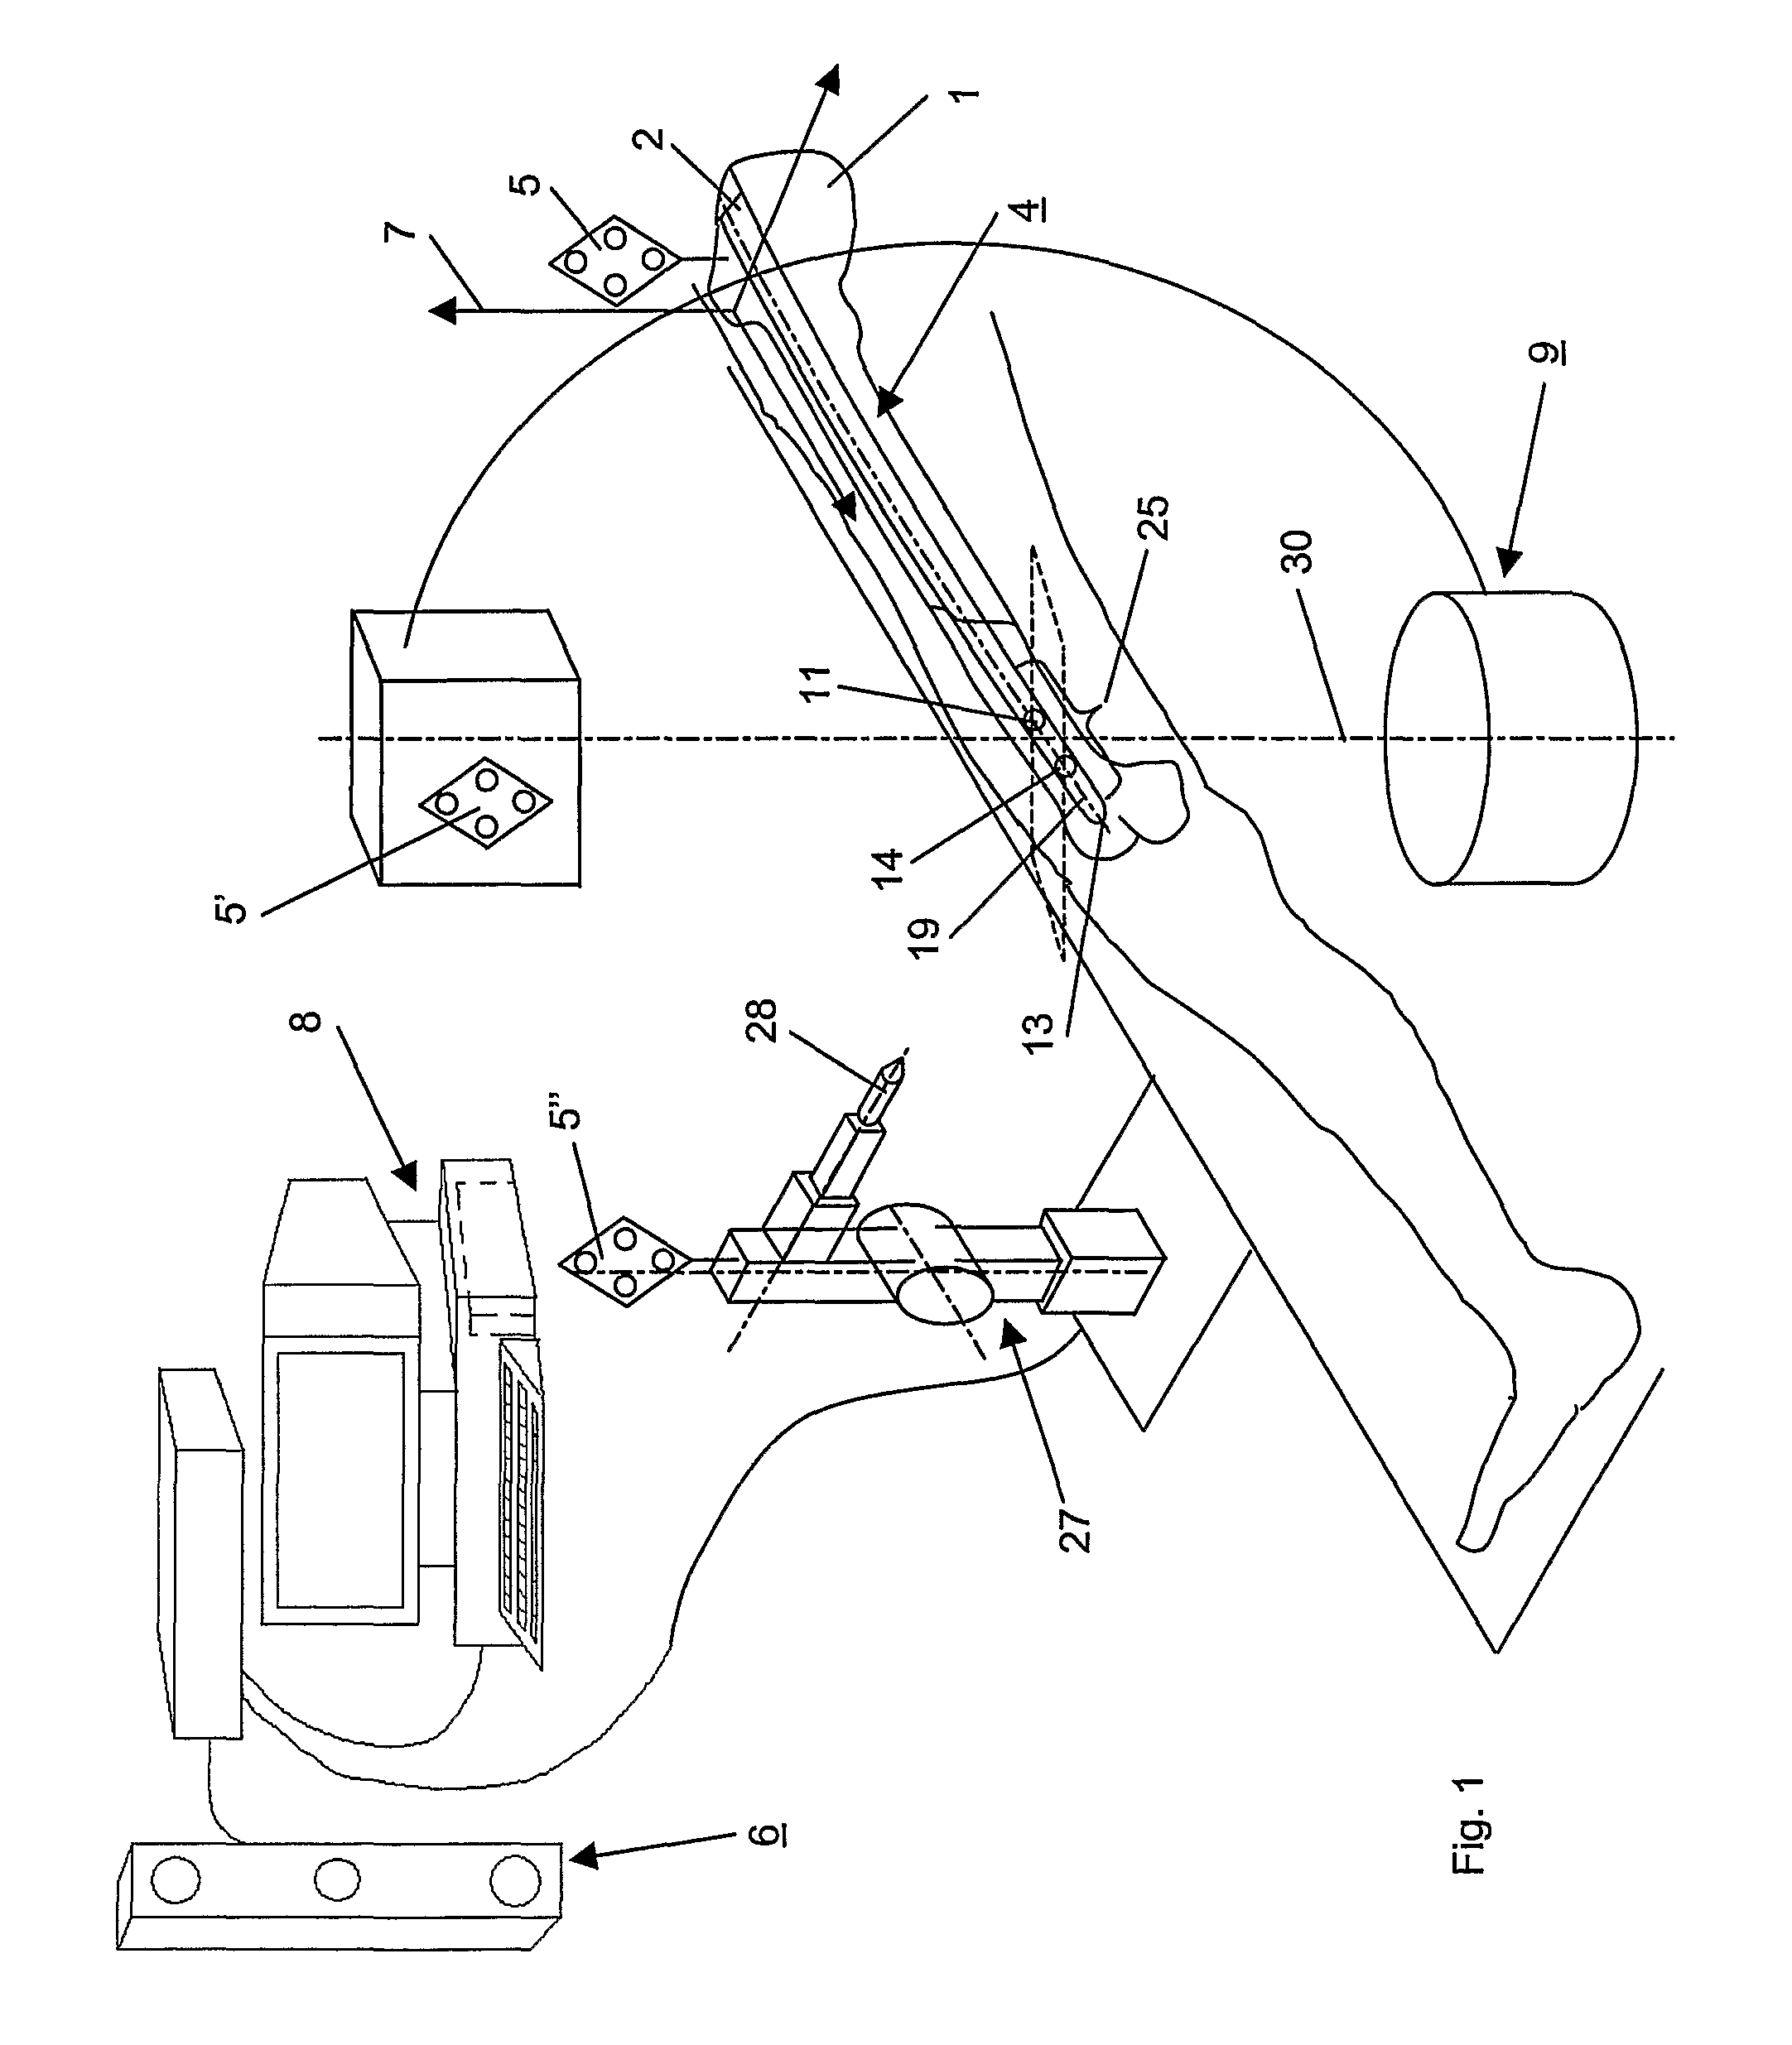 Method and Device for Computer Assisted Distal Locking of Intramedullary Nails